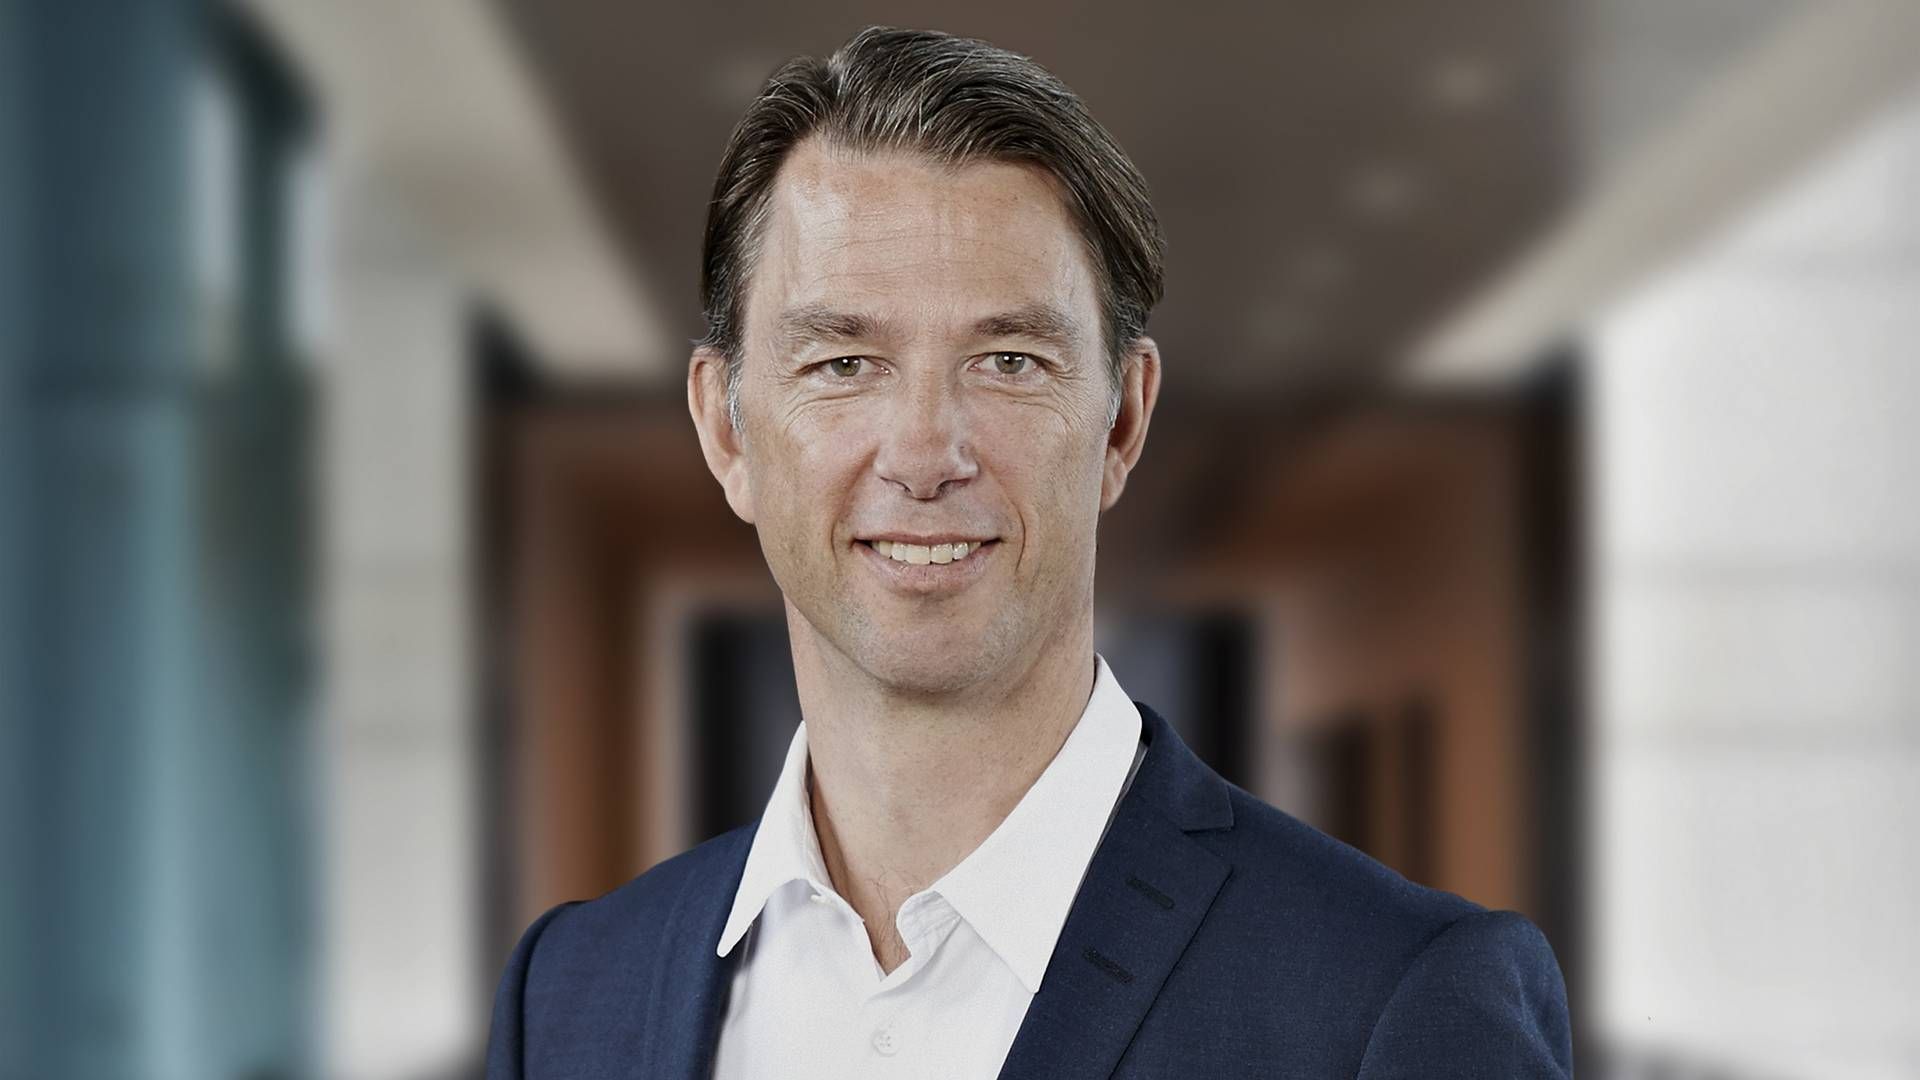 Eric Pedersen has been vocal on sustainability issues for years in Danish media during his tenure as head of Nordea funds' Danish branch. | Photo: Nordea Pressefoto